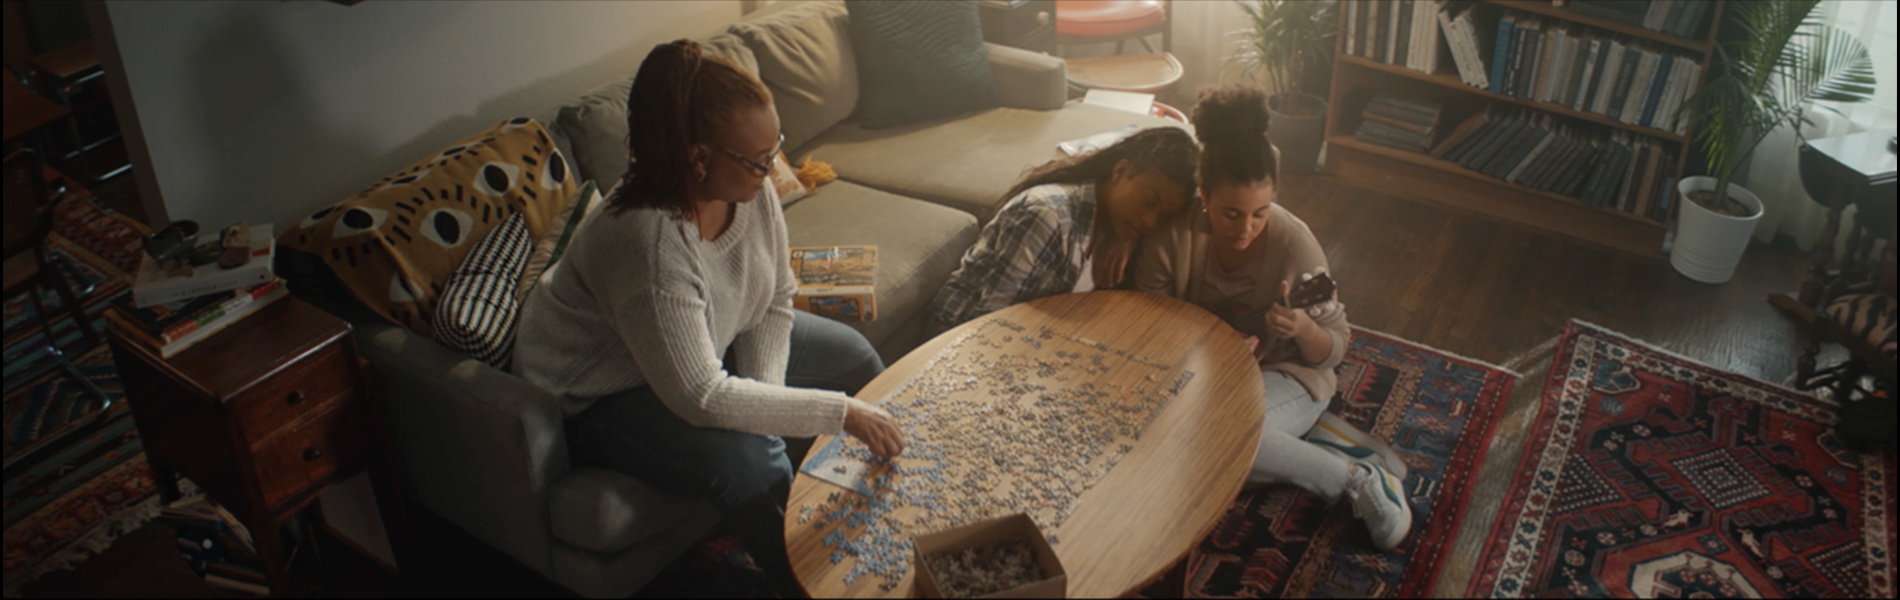 People around a living room table, putting together a puzzle